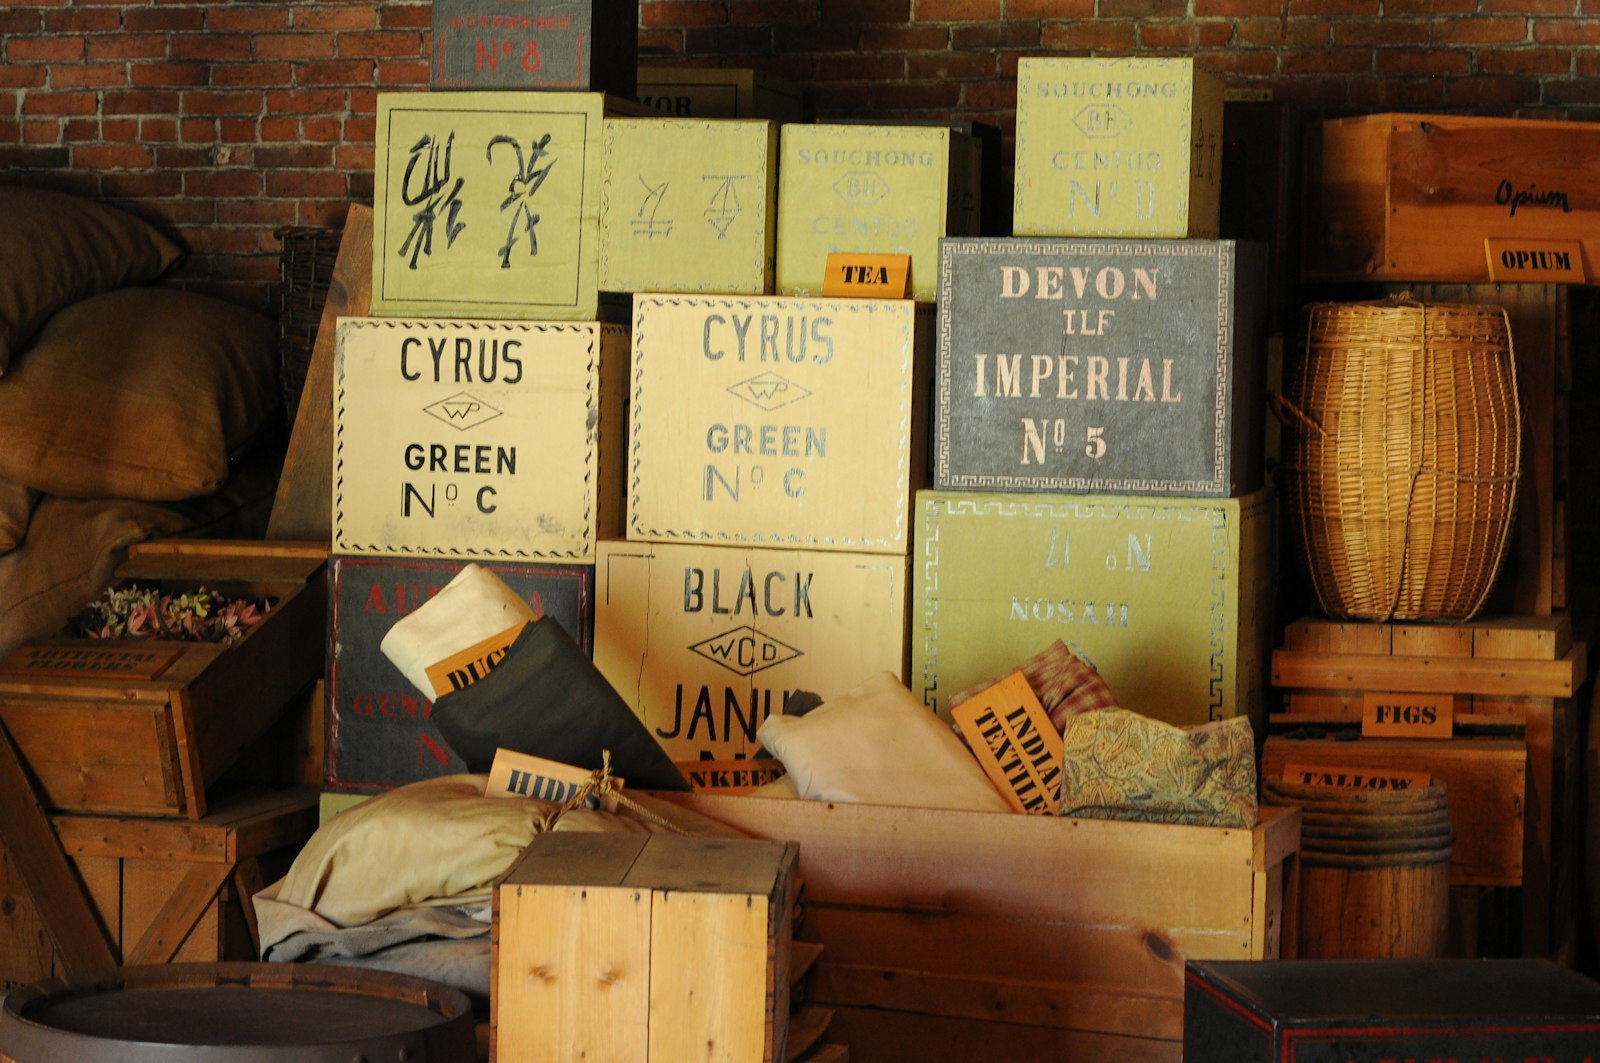 Exhibit of boxes, labeled things such as "Cypress Green" and "Devon Imperial"